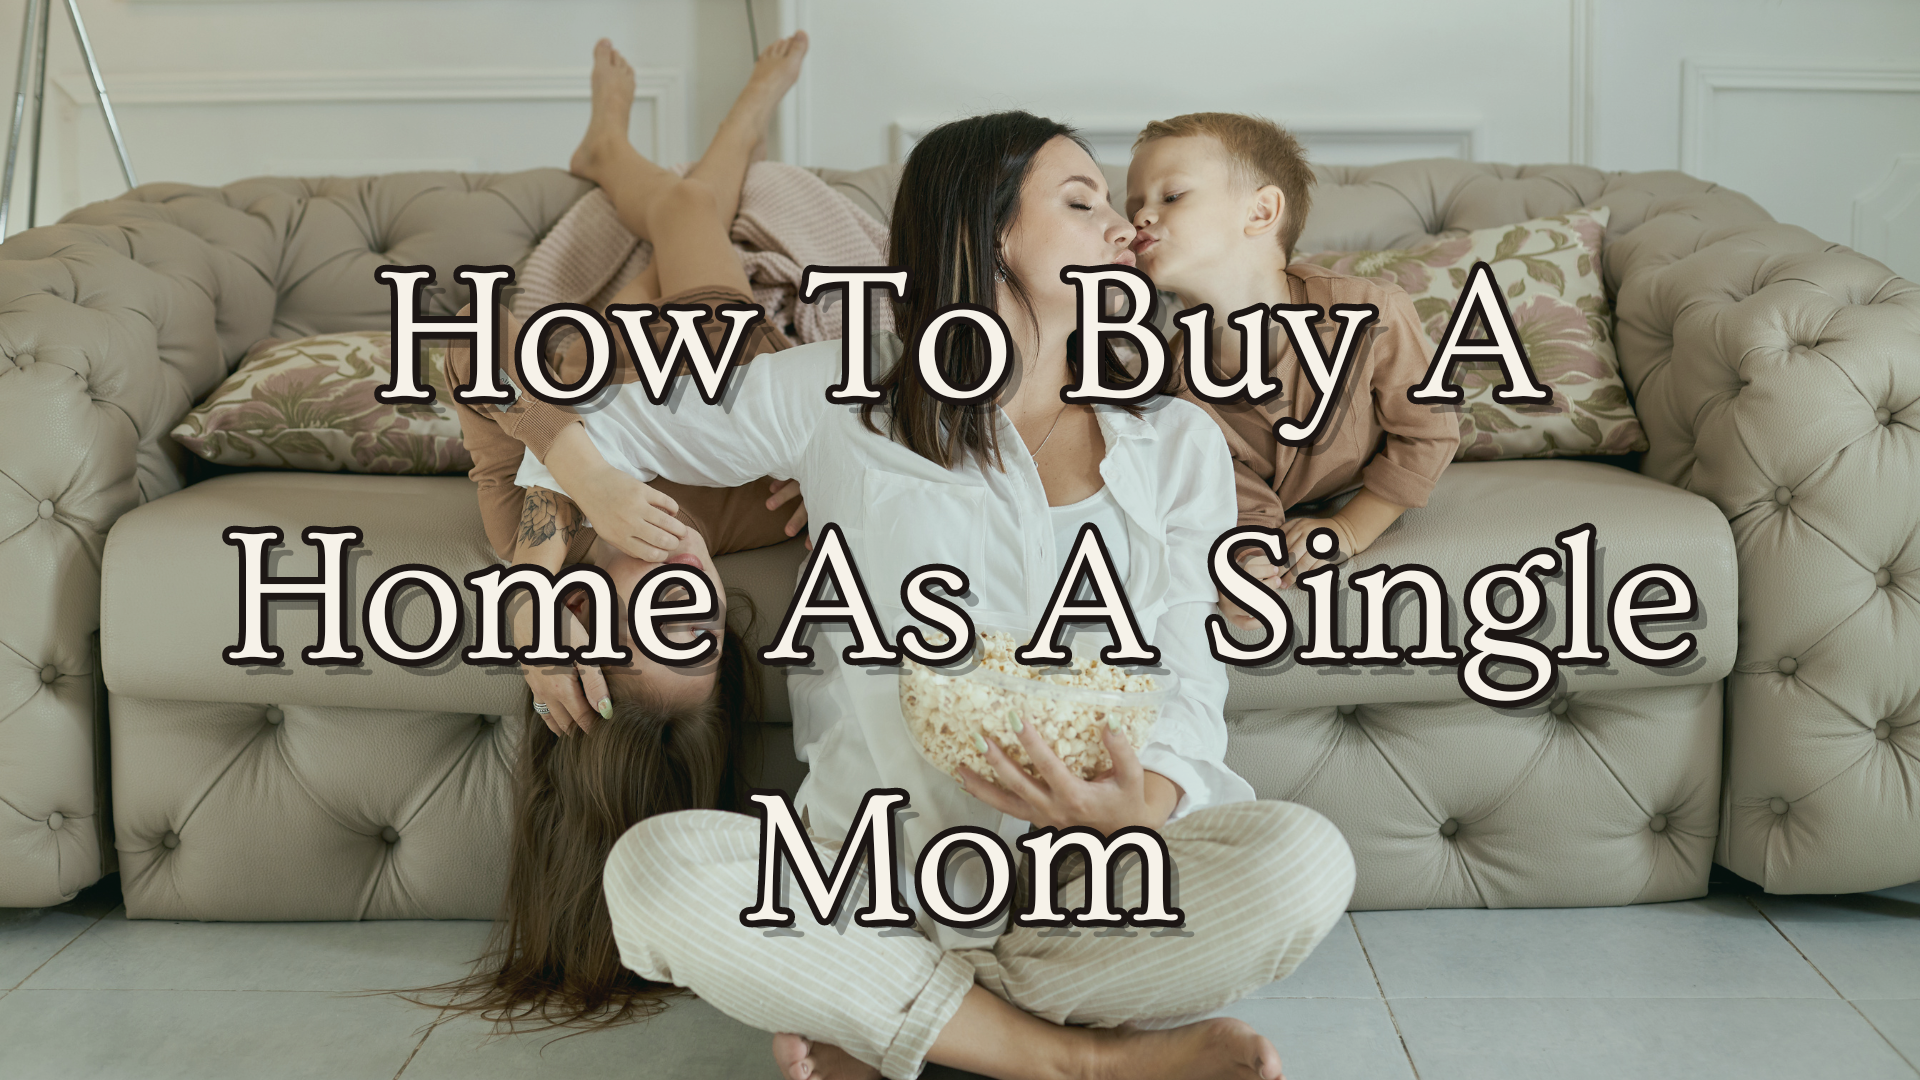 How to buy a home as a single mom